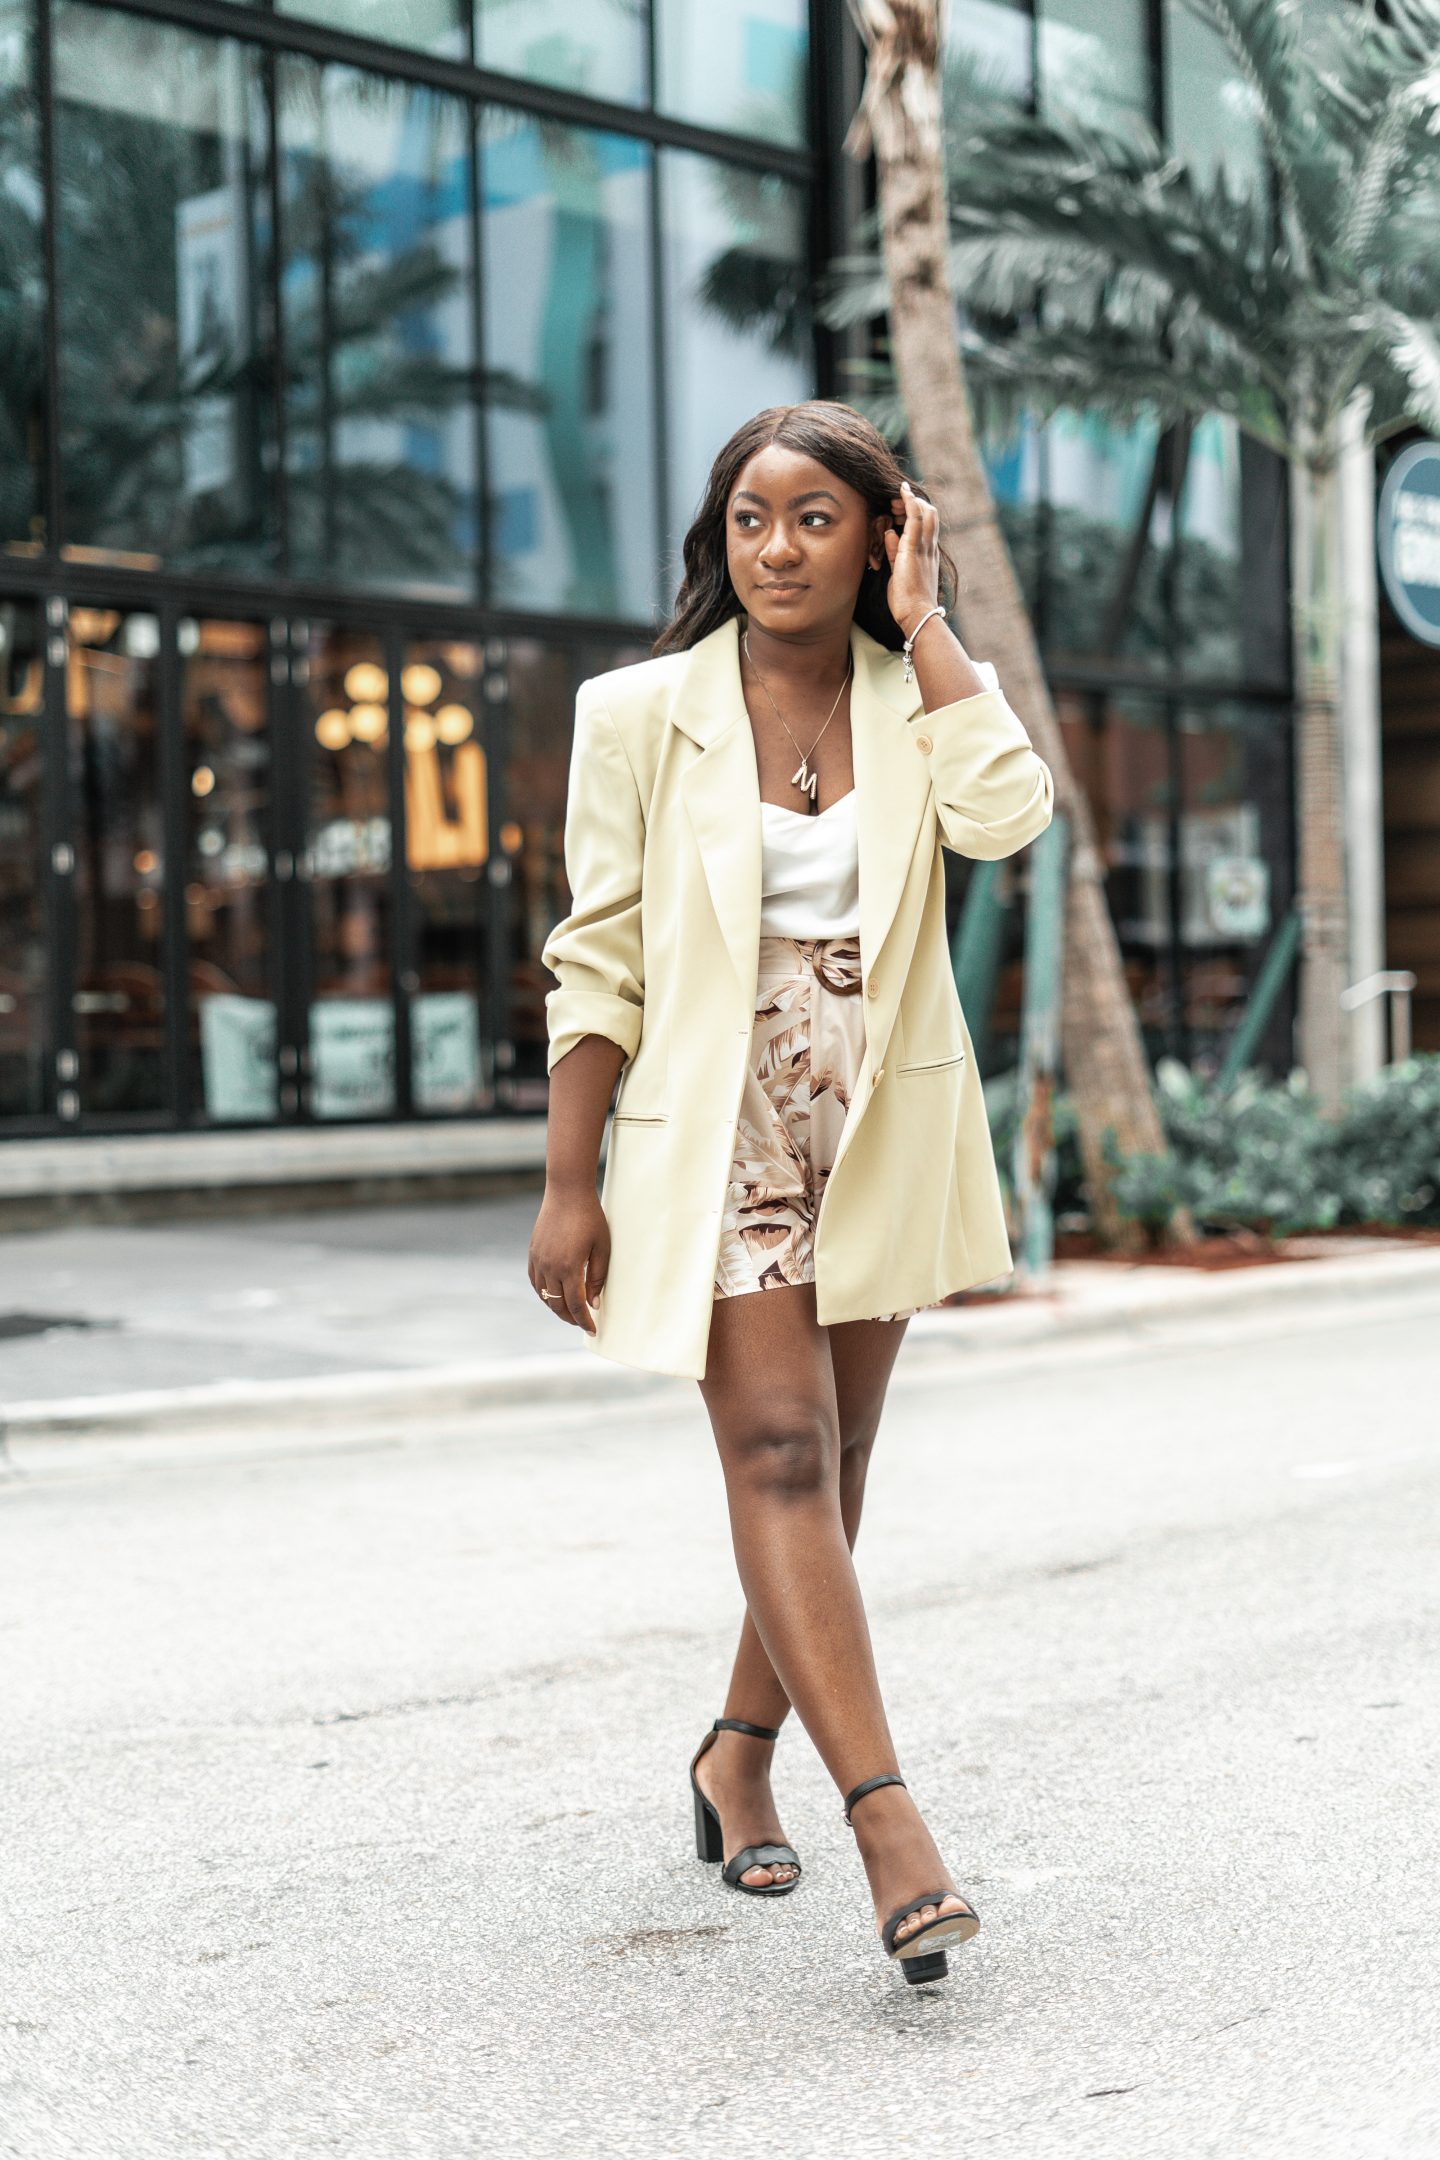 An image of my outfit  wearing the jacket from my wardrobe. Wearing a lime green blazer, white tank and palm print shorts.